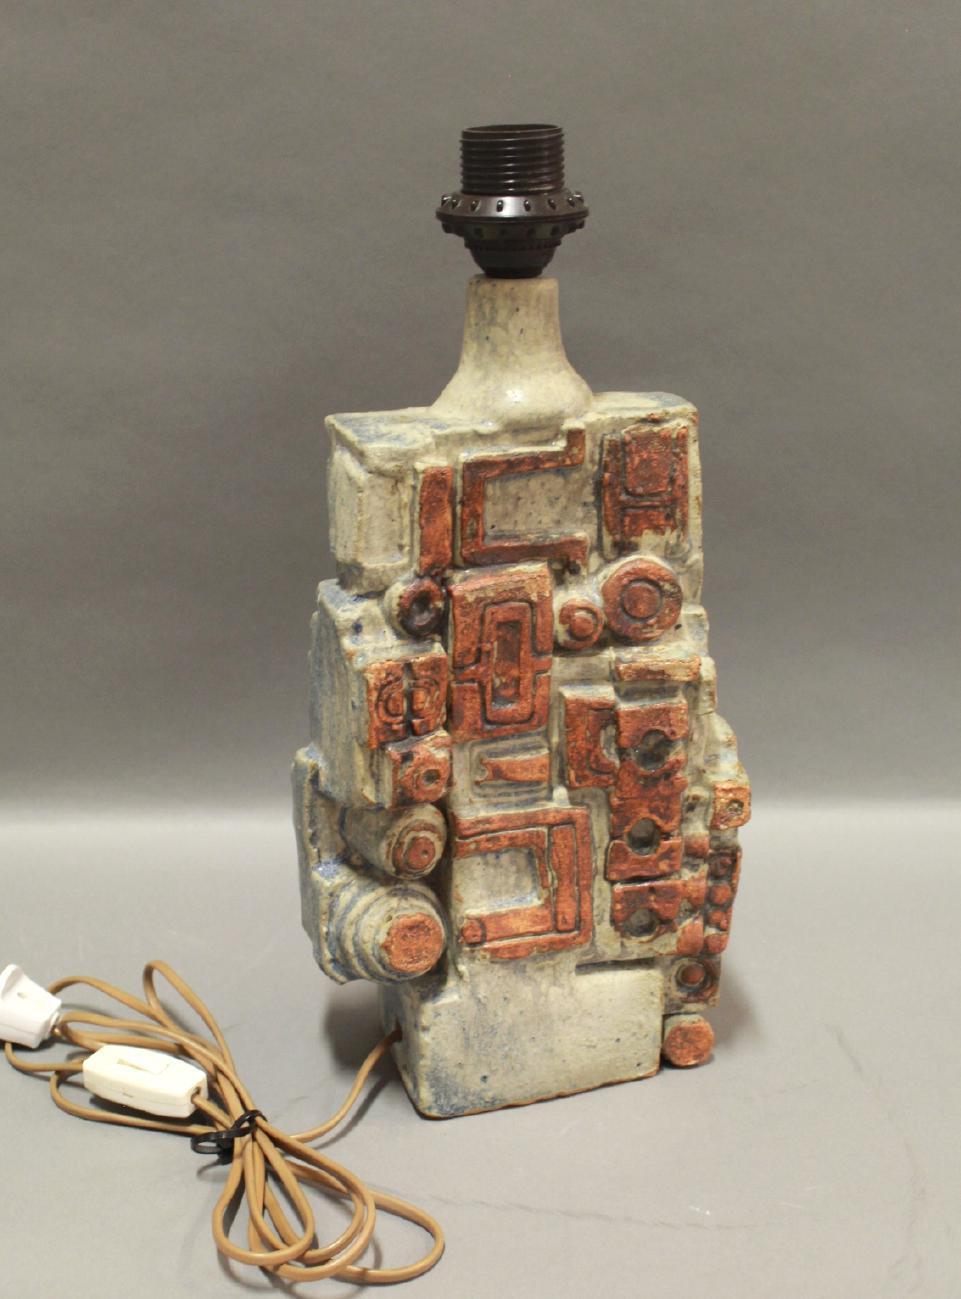 This brutalist mid-century modern stoneware table lamp with matte cream white and terracotta-colored glaze and relief decoration, was crafted by the renowned artist Bernard Rooke, born in 1938.

It was made in Rooke's own studio in Swilland,